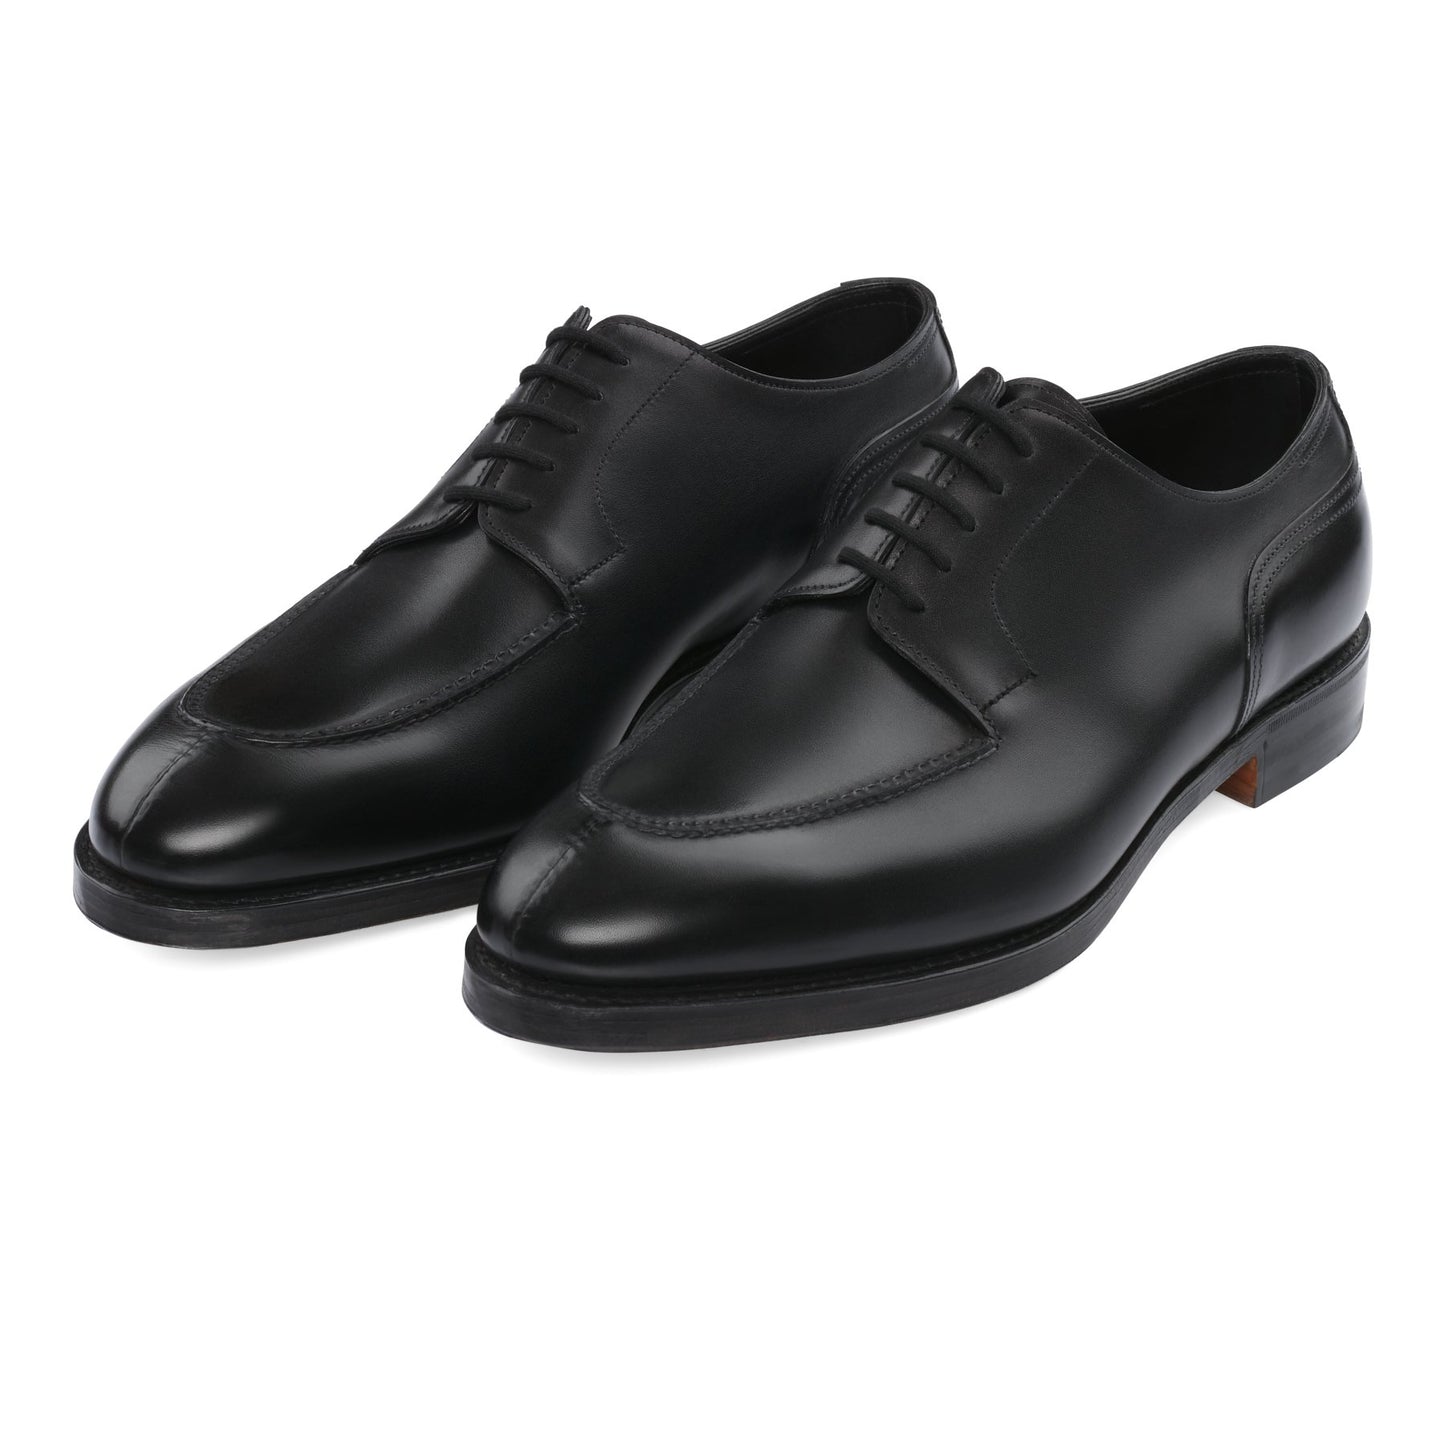 John Lobb "Harlyn" Five-Eyelet Leather Derby Shoes with Hand-Stitched Apron in Black - SARTALE